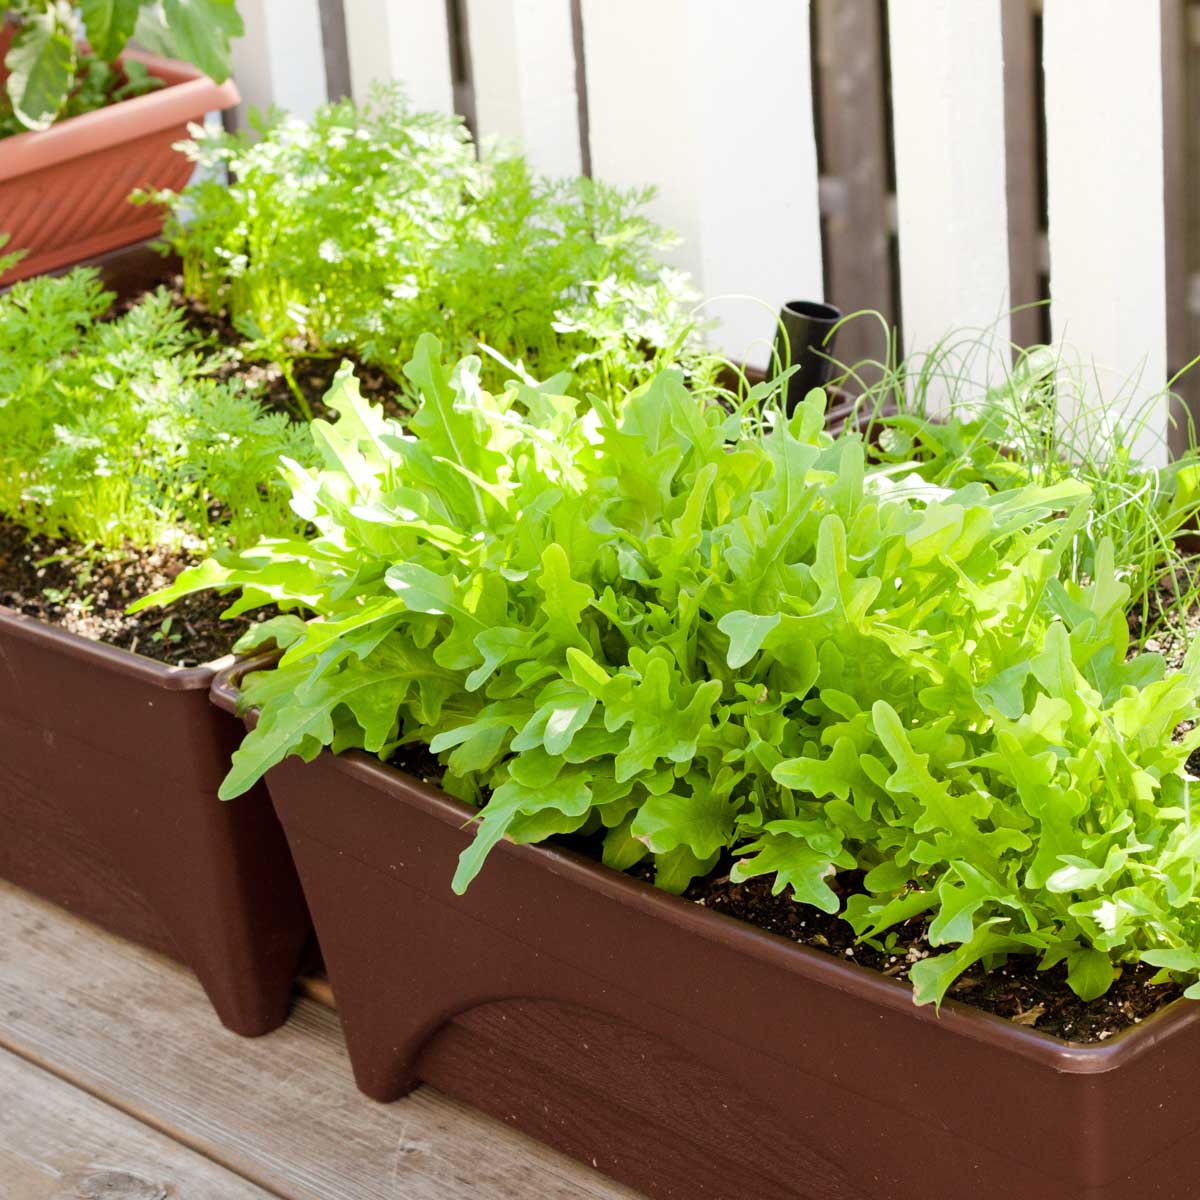 Vegetable Container Gardening Ideas: Tips for Beginners - Peanut